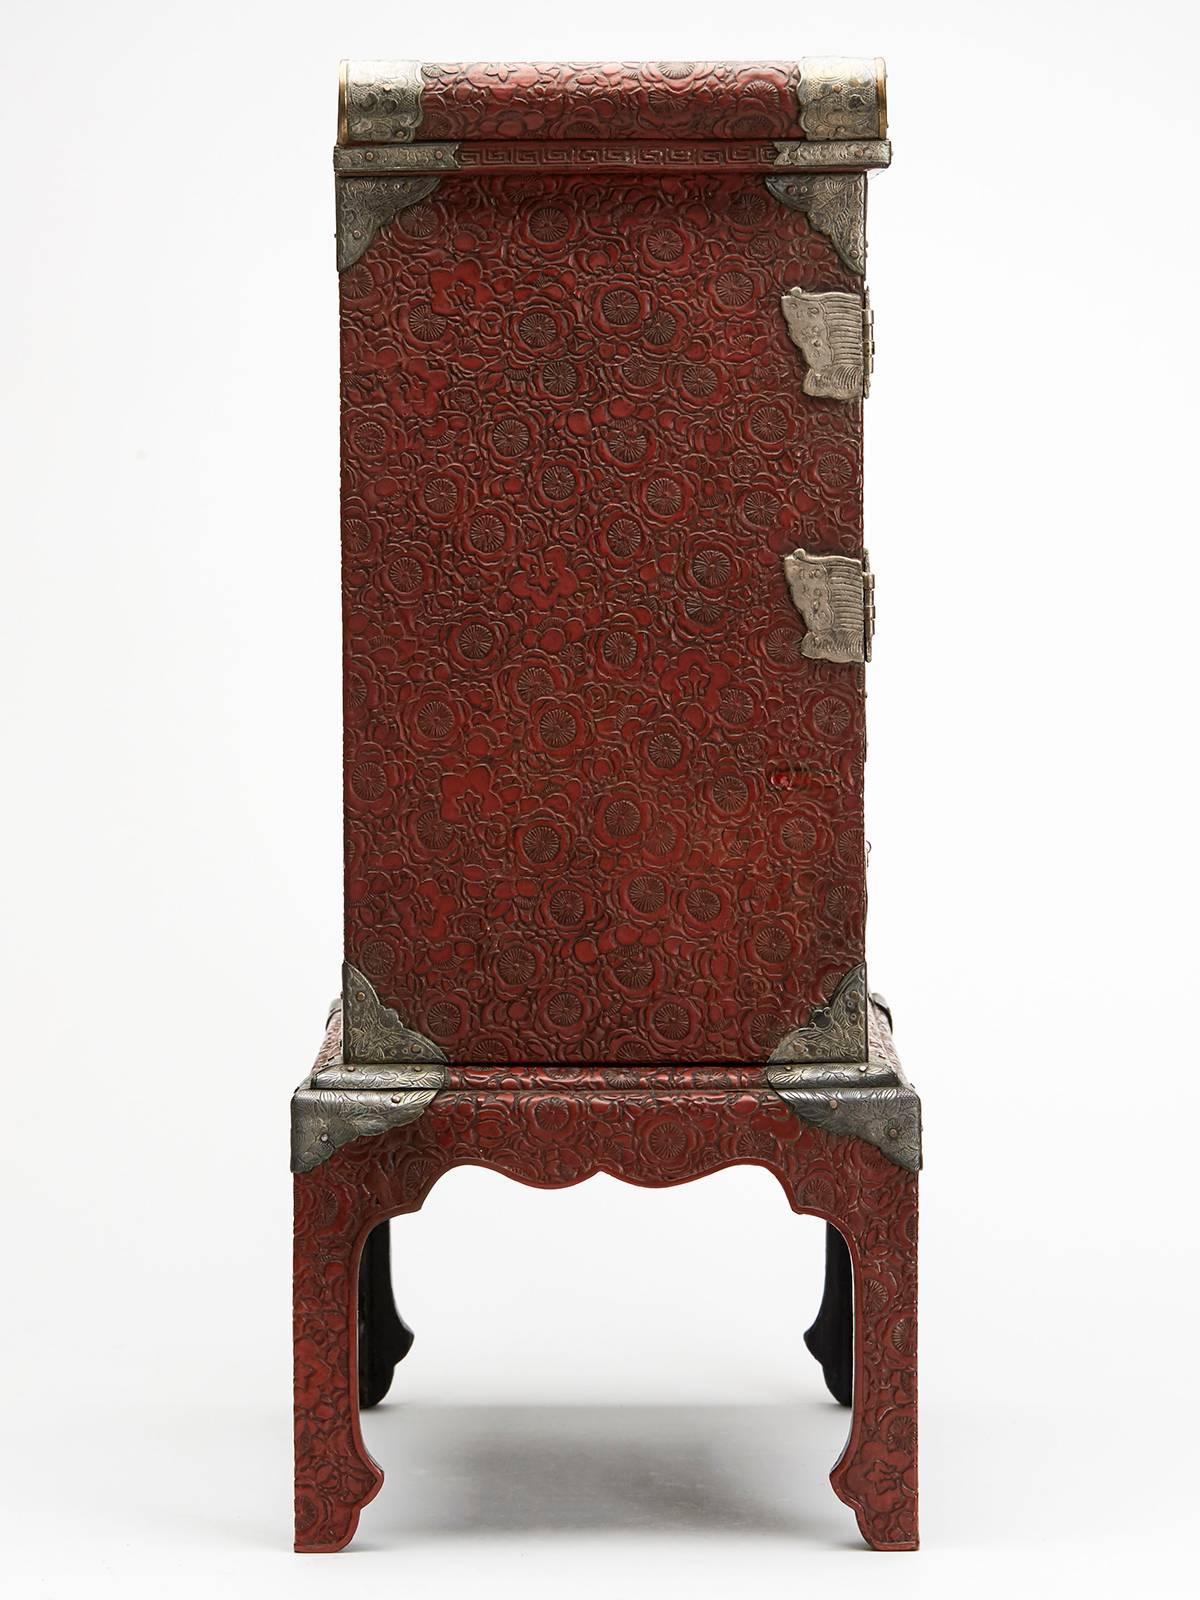 Enameled Japanese Red Lacquer Cabinet and Stand Satsuma Panels, 19th Century